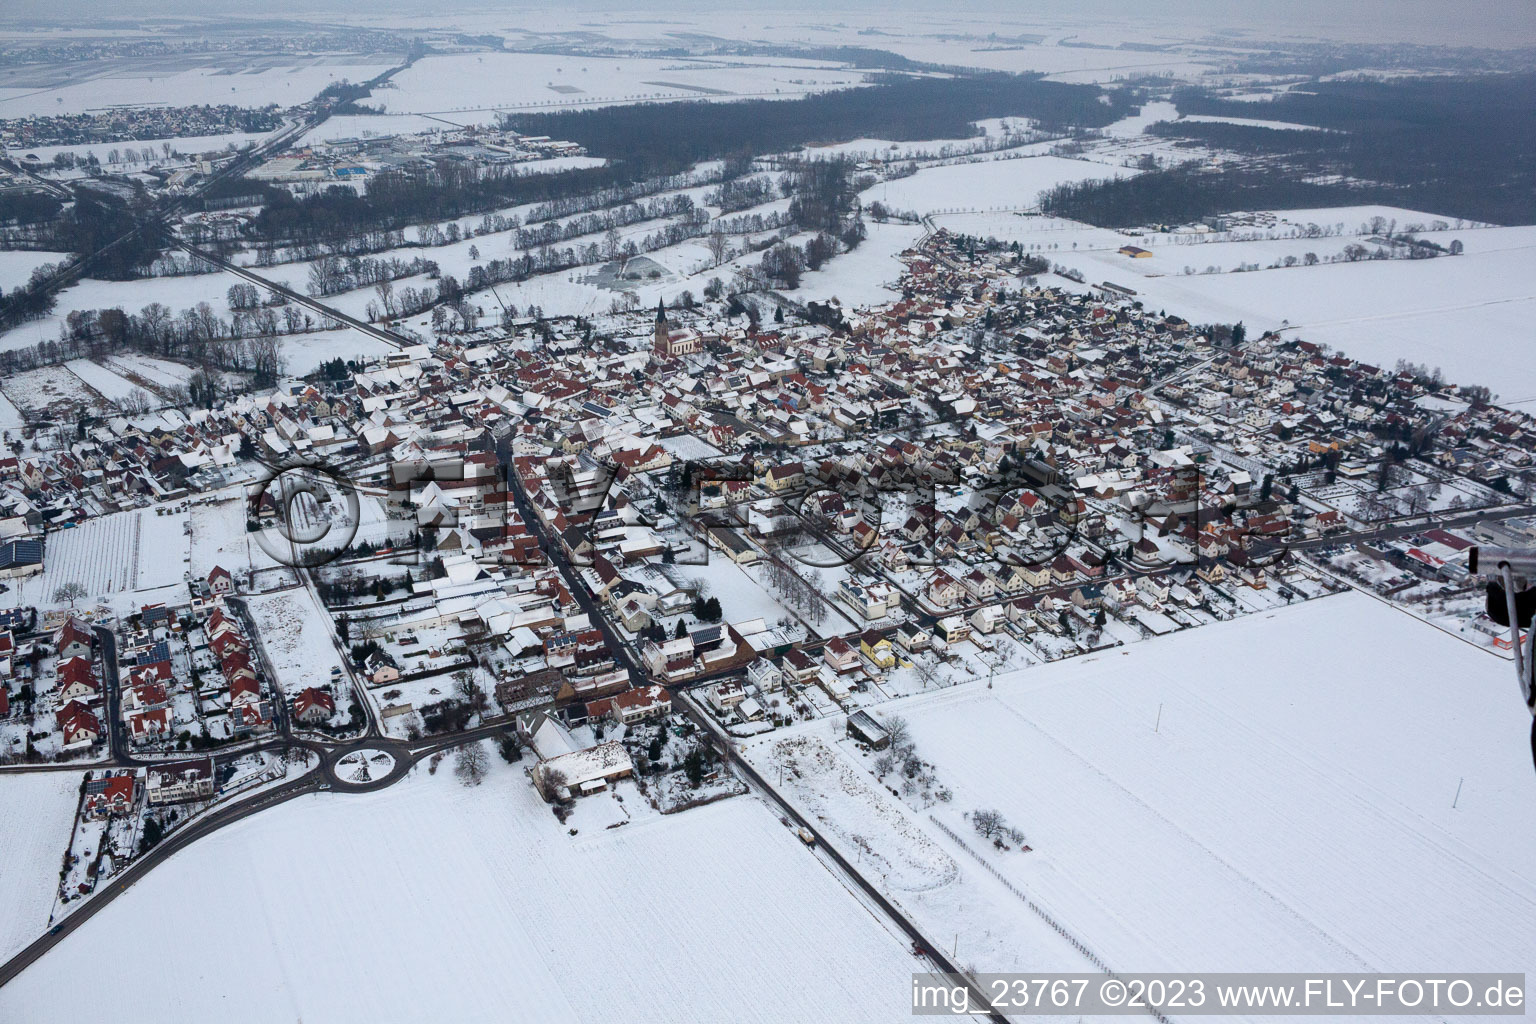 Steinweiler in the state Rhineland-Palatinate, Germany from above